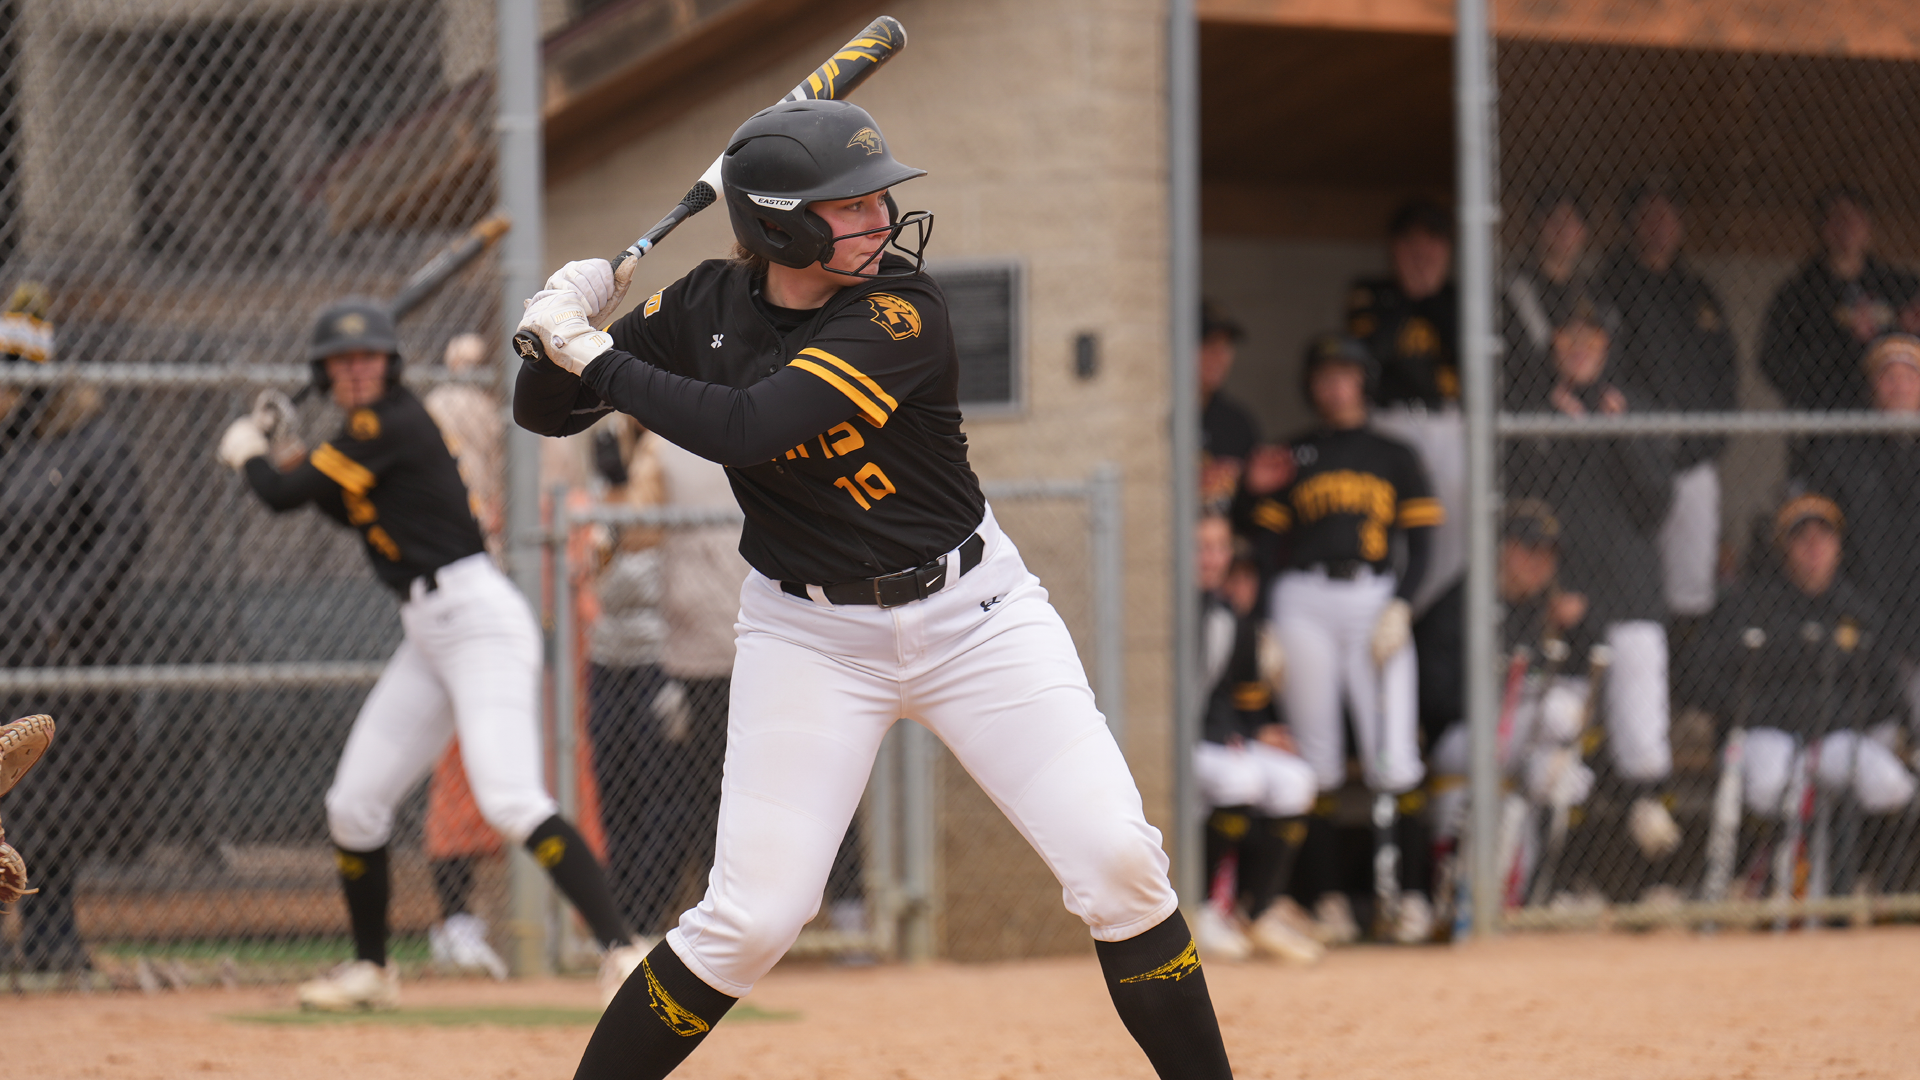 Sophie Wery hit two home runs for five RBIs in the Titans' sweep of the Pioneers on Thursday. Photo Credit: Terri Cole, UW-Oshkosh Sports Information